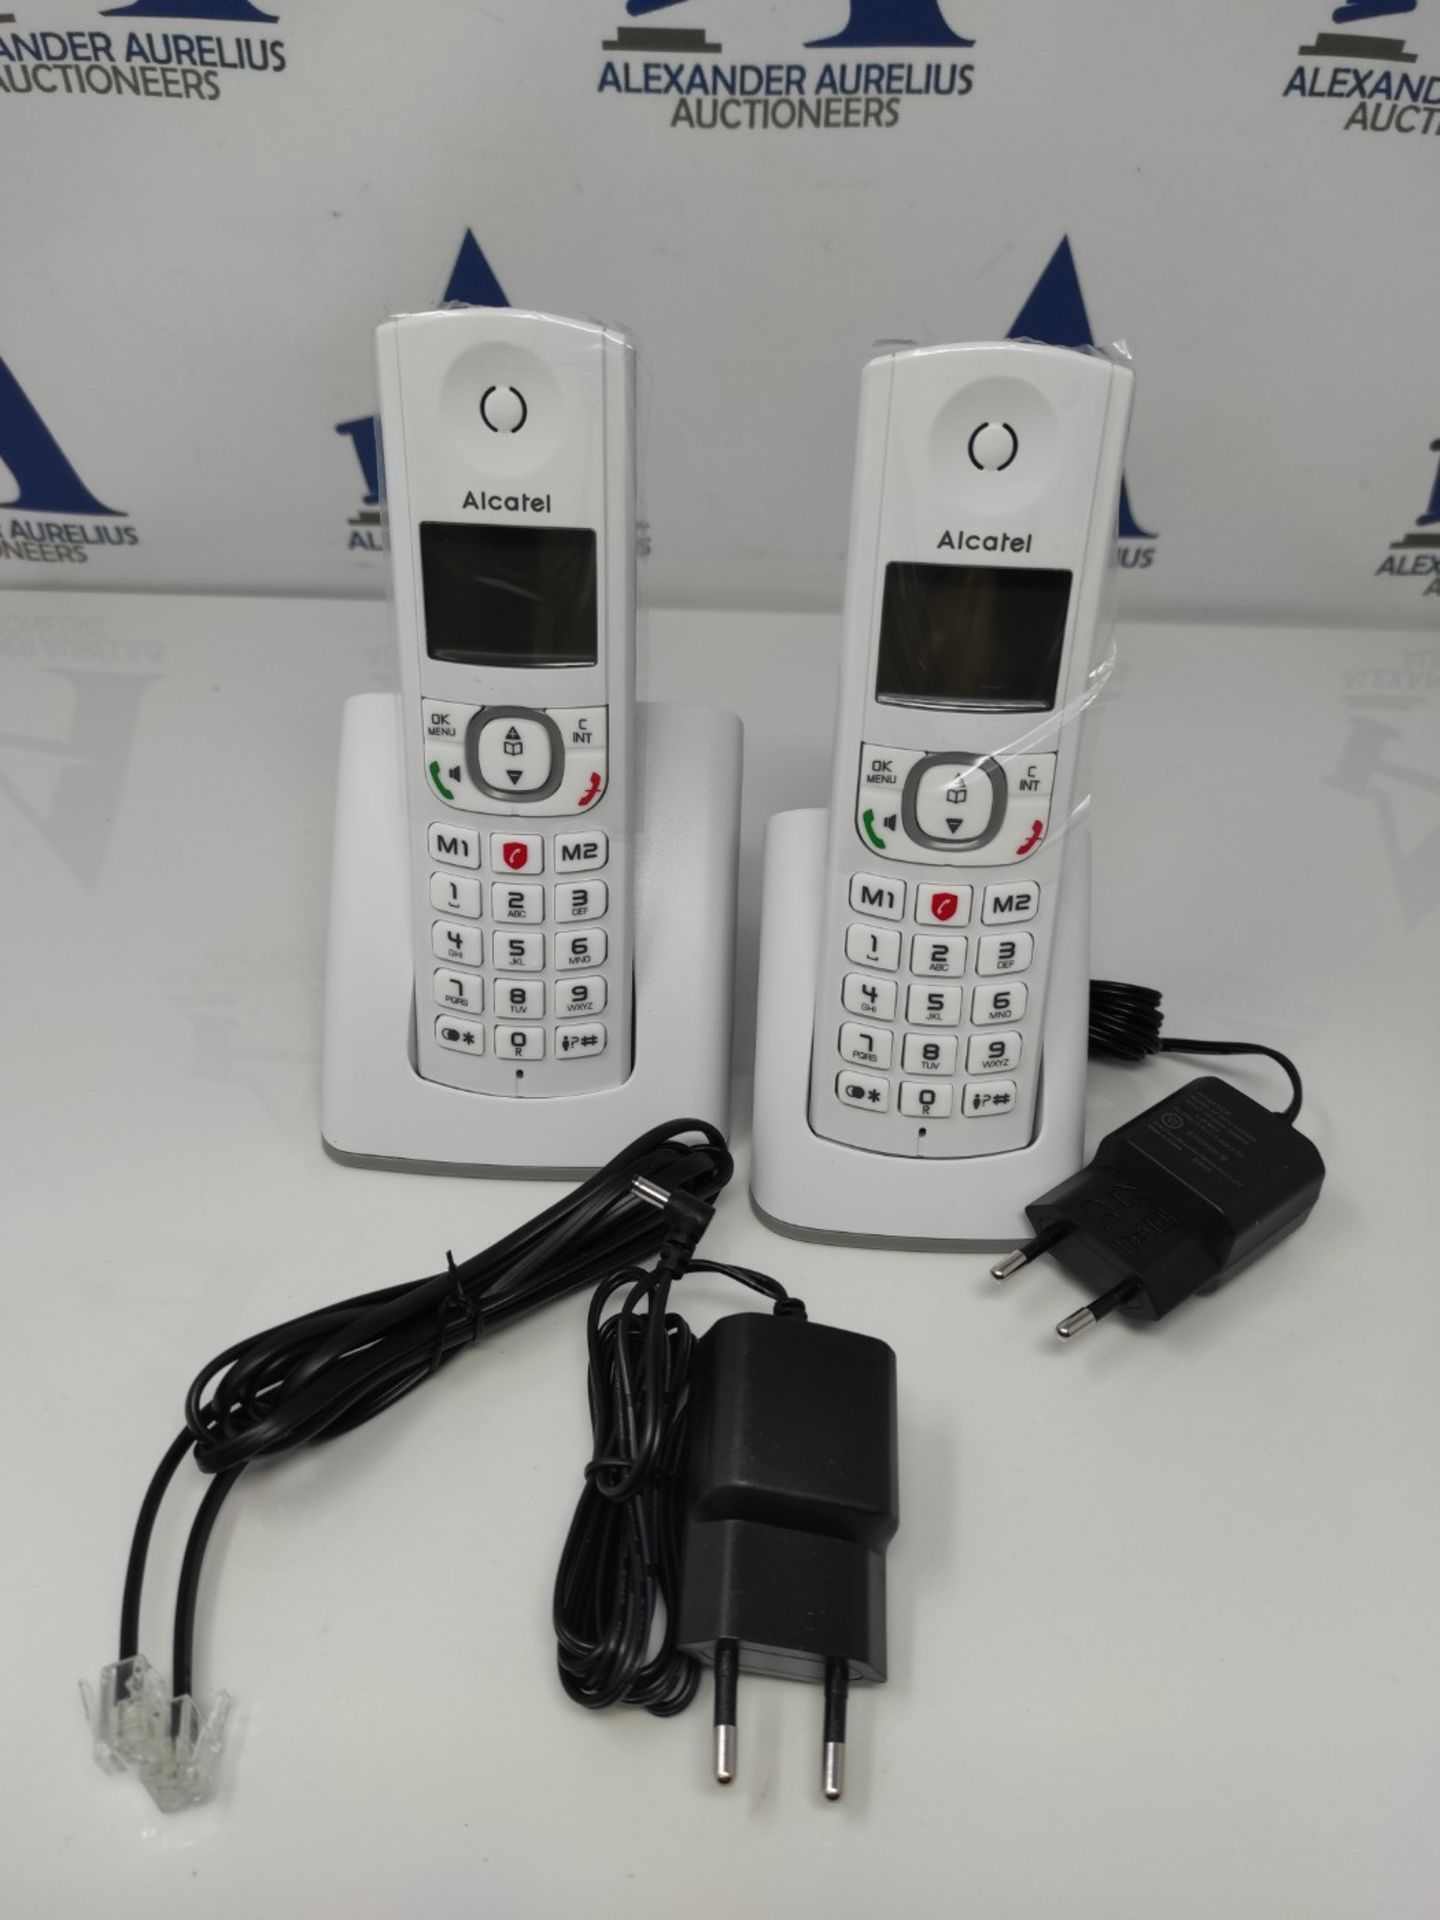 Alcatel F530 Duo, cordless phone with 2 handsets, call blocking, hands-free and two di - Image 3 of 3